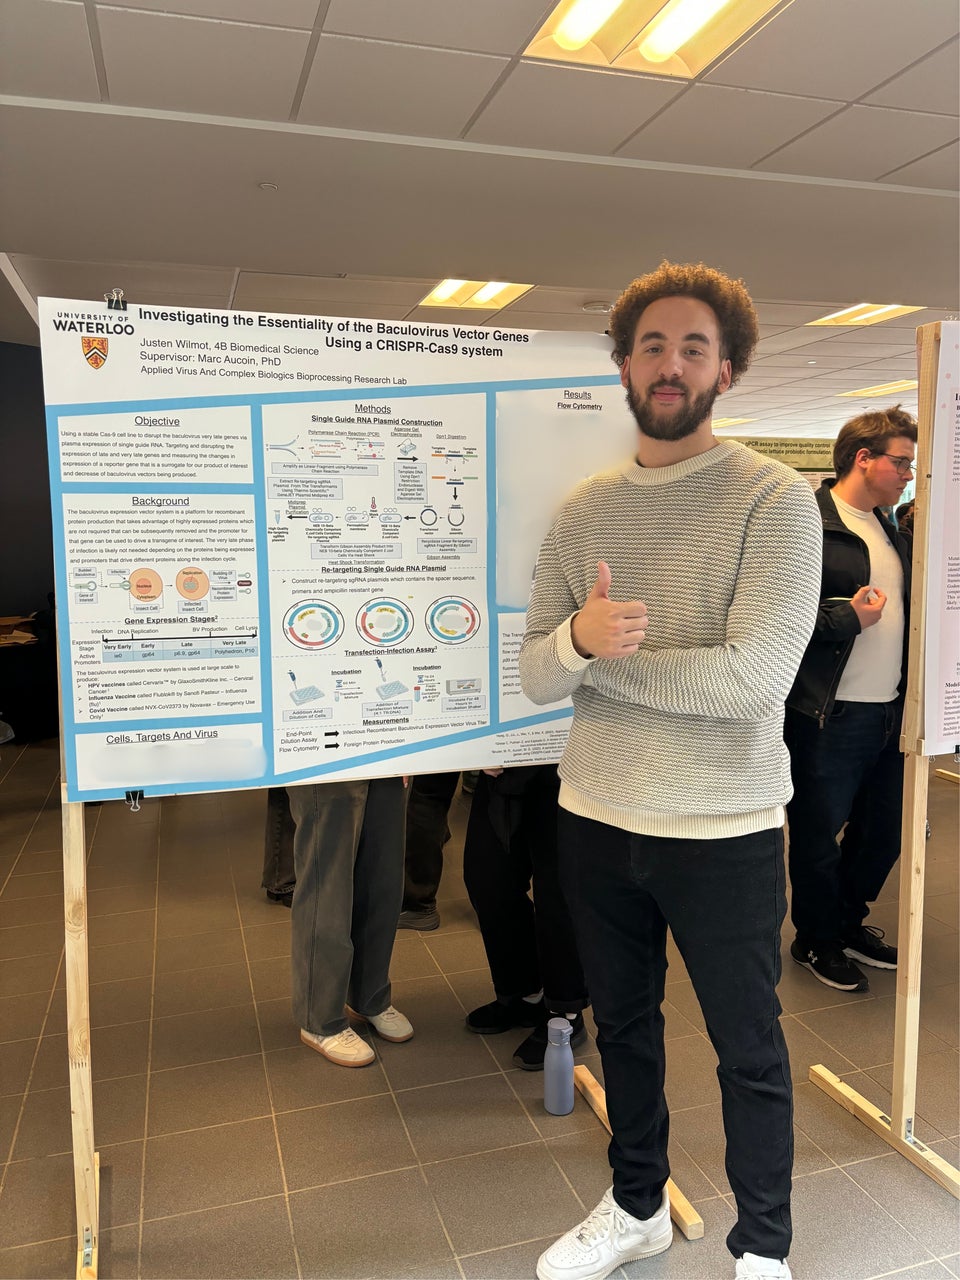 Justen is giving the thumbs up. He is standing in front of a poster presentation of his research.